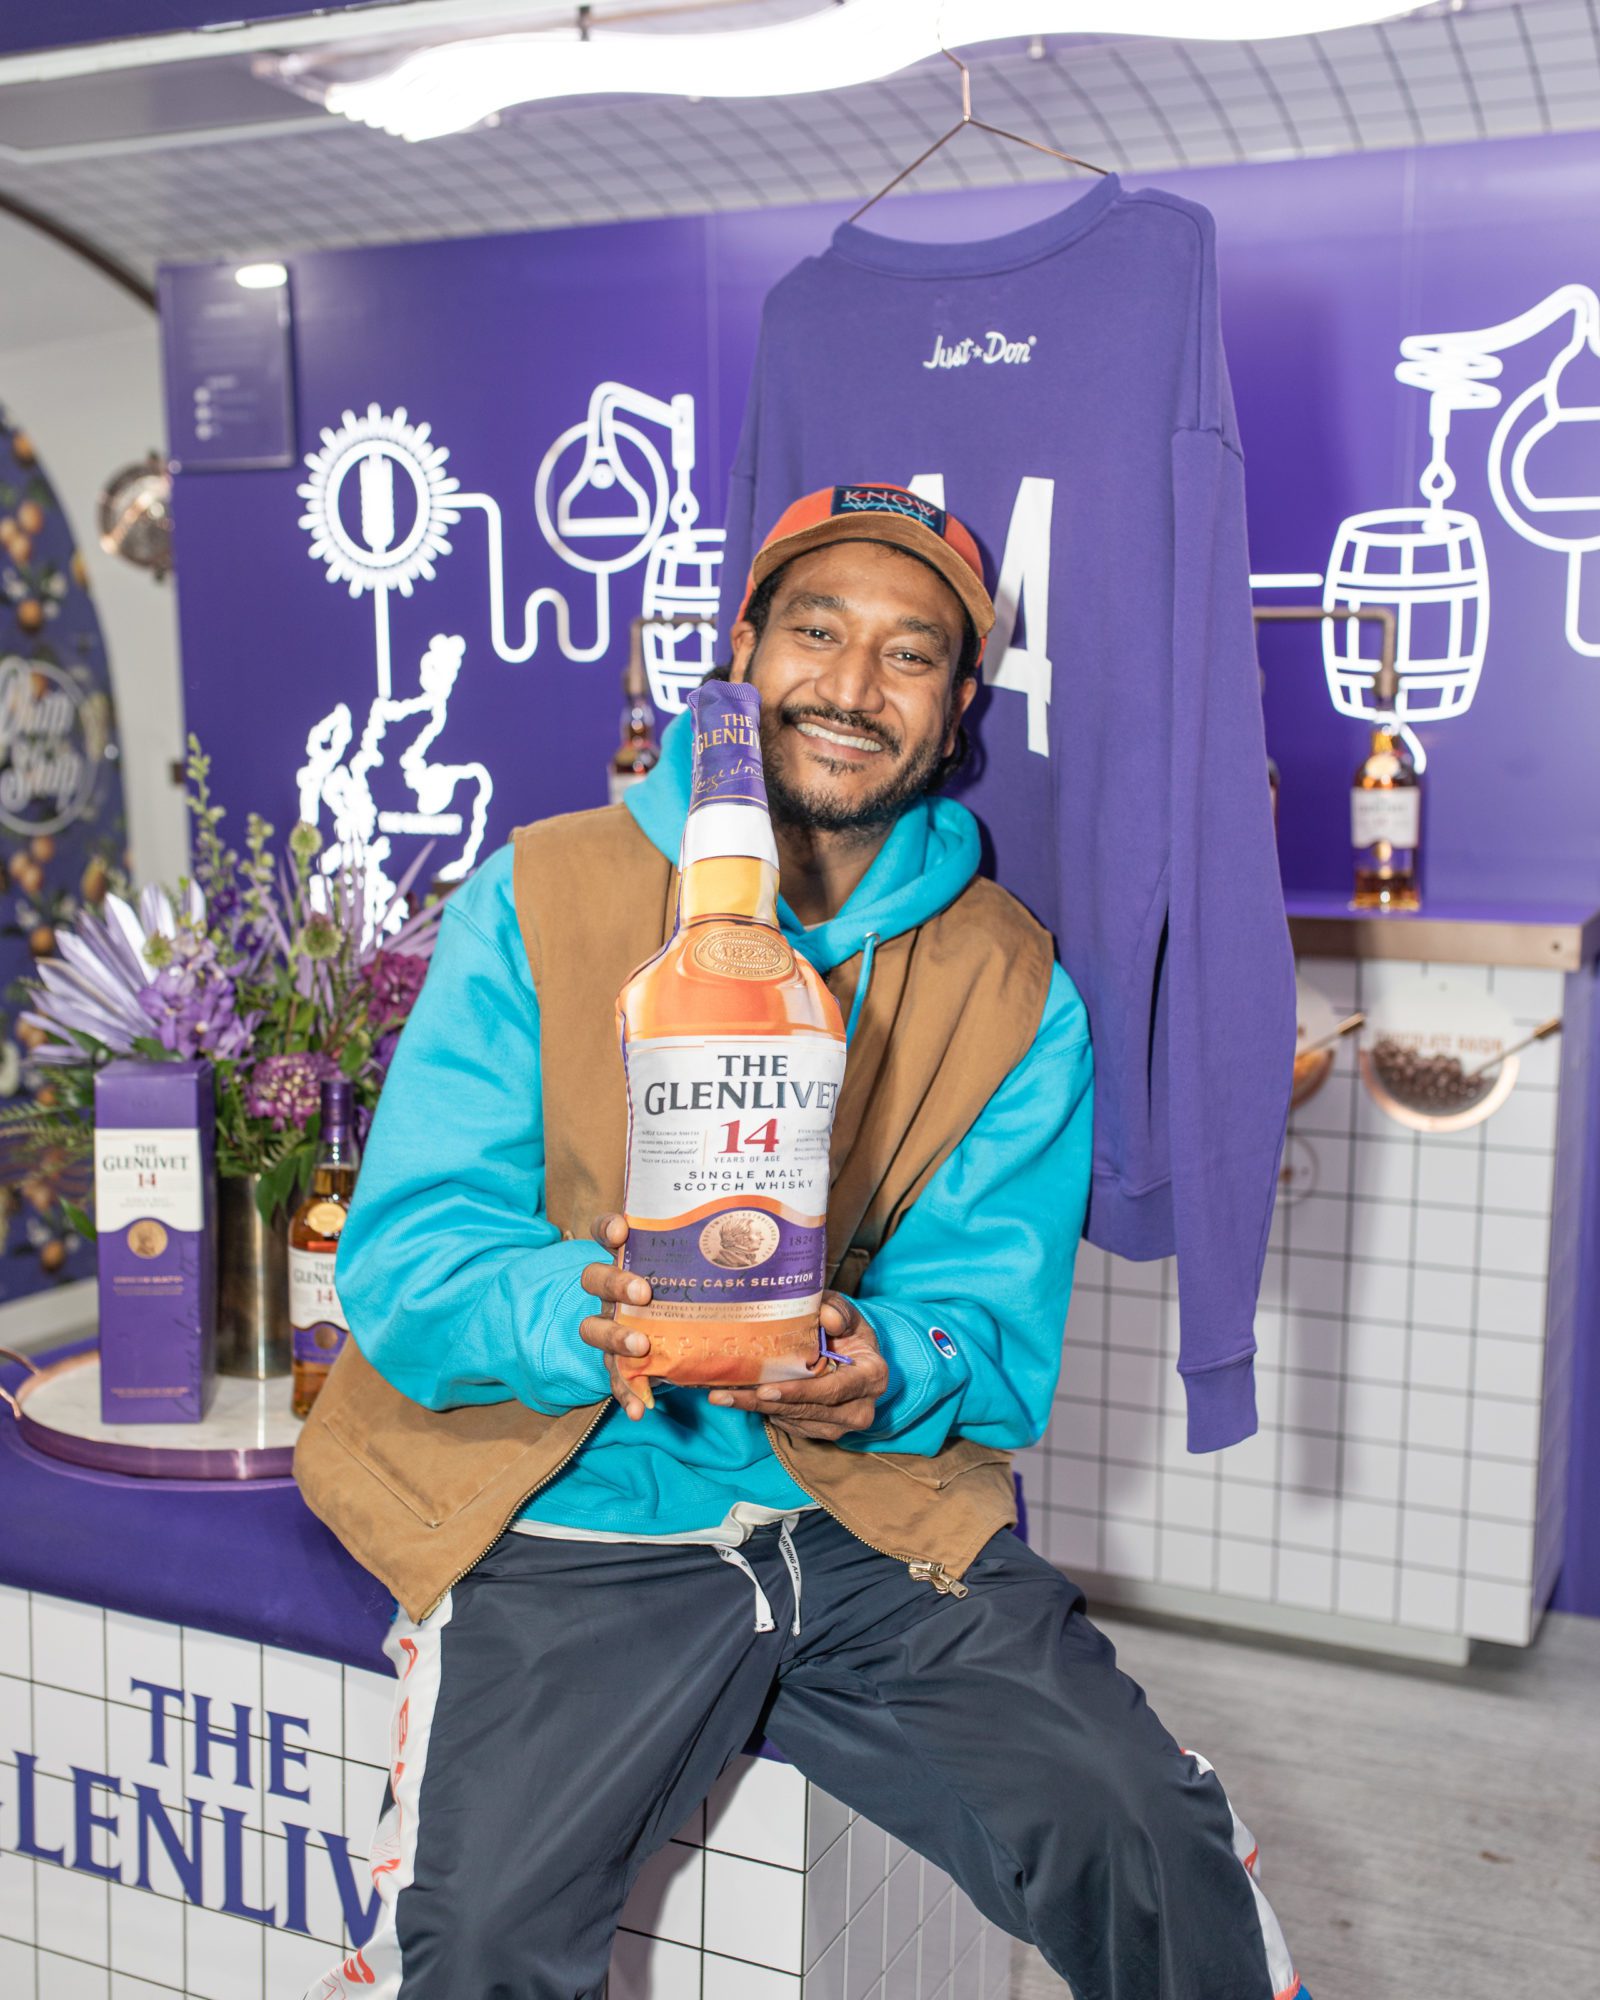 The Glenlivet + Don C Unveil Partnership With Limited Edition Dope Sweater